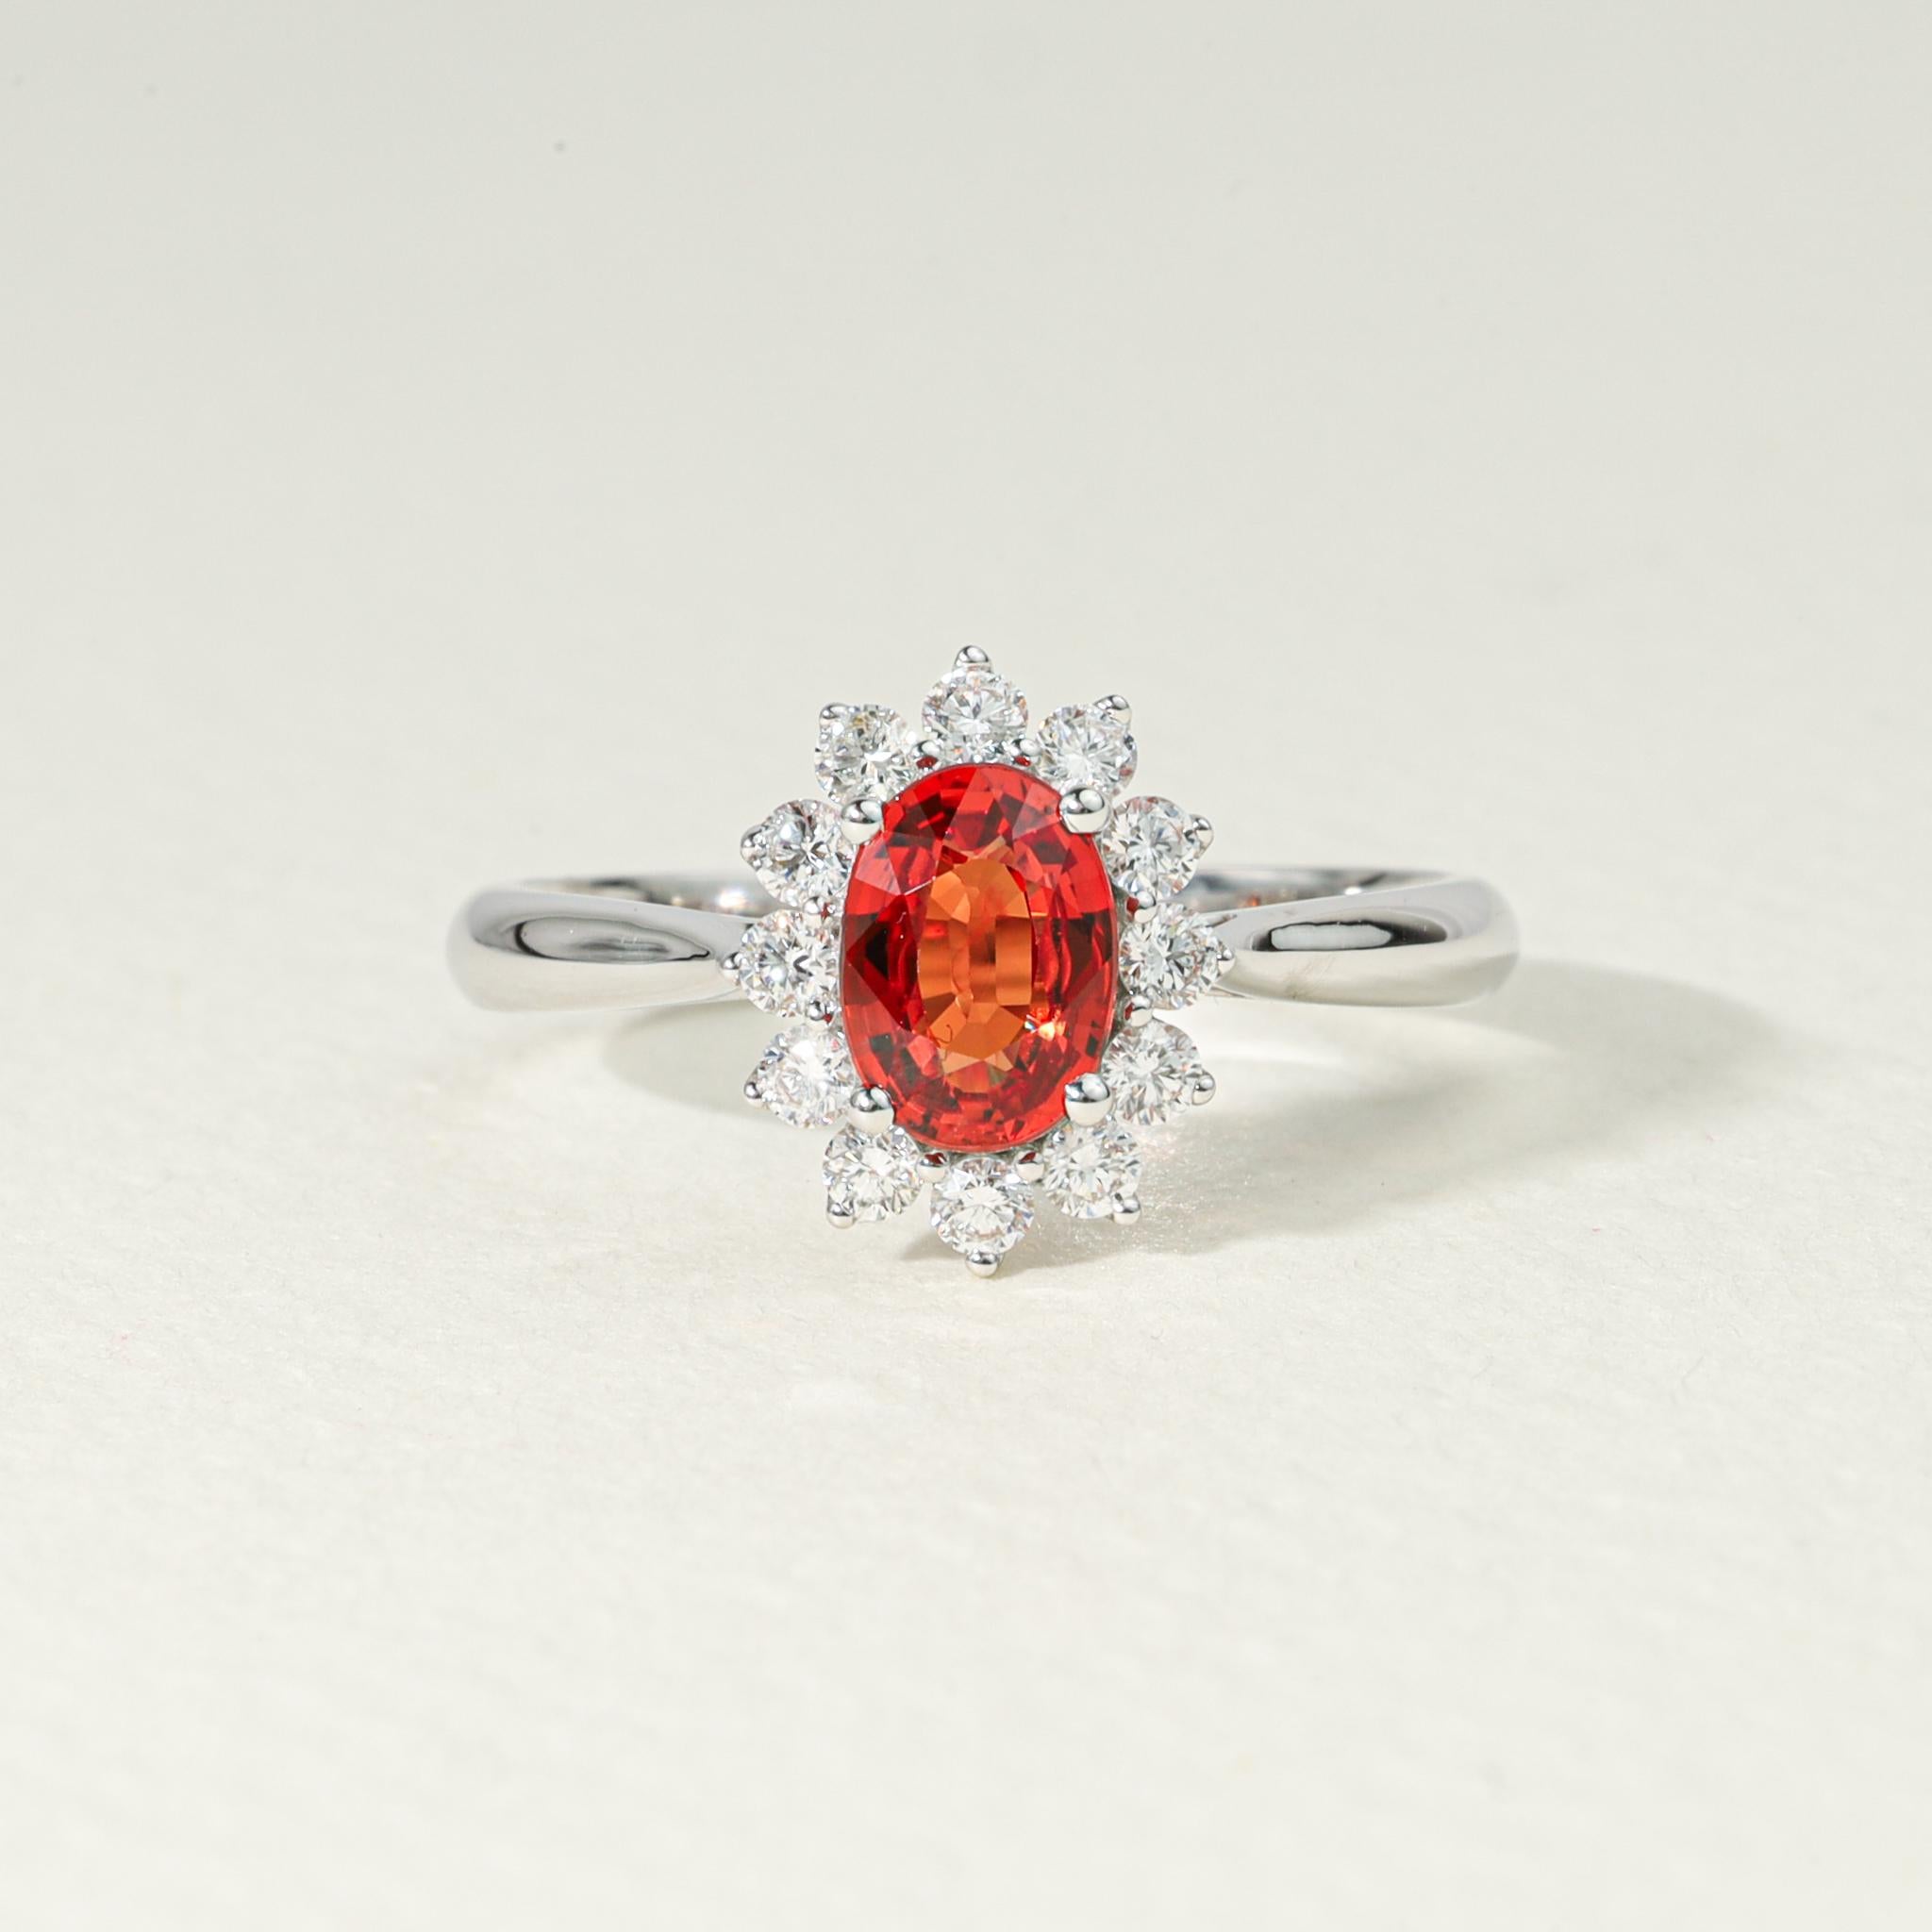 Oval Orange Sapphire Diamond Halo Cocktail Engagement Ring in White Gold

Available in 18k white gold.

Same design can be made also with other custom gemstones per request.

Product details:

- Solid gold

- Diamond - approx. 0.30 carat

- Sapphire